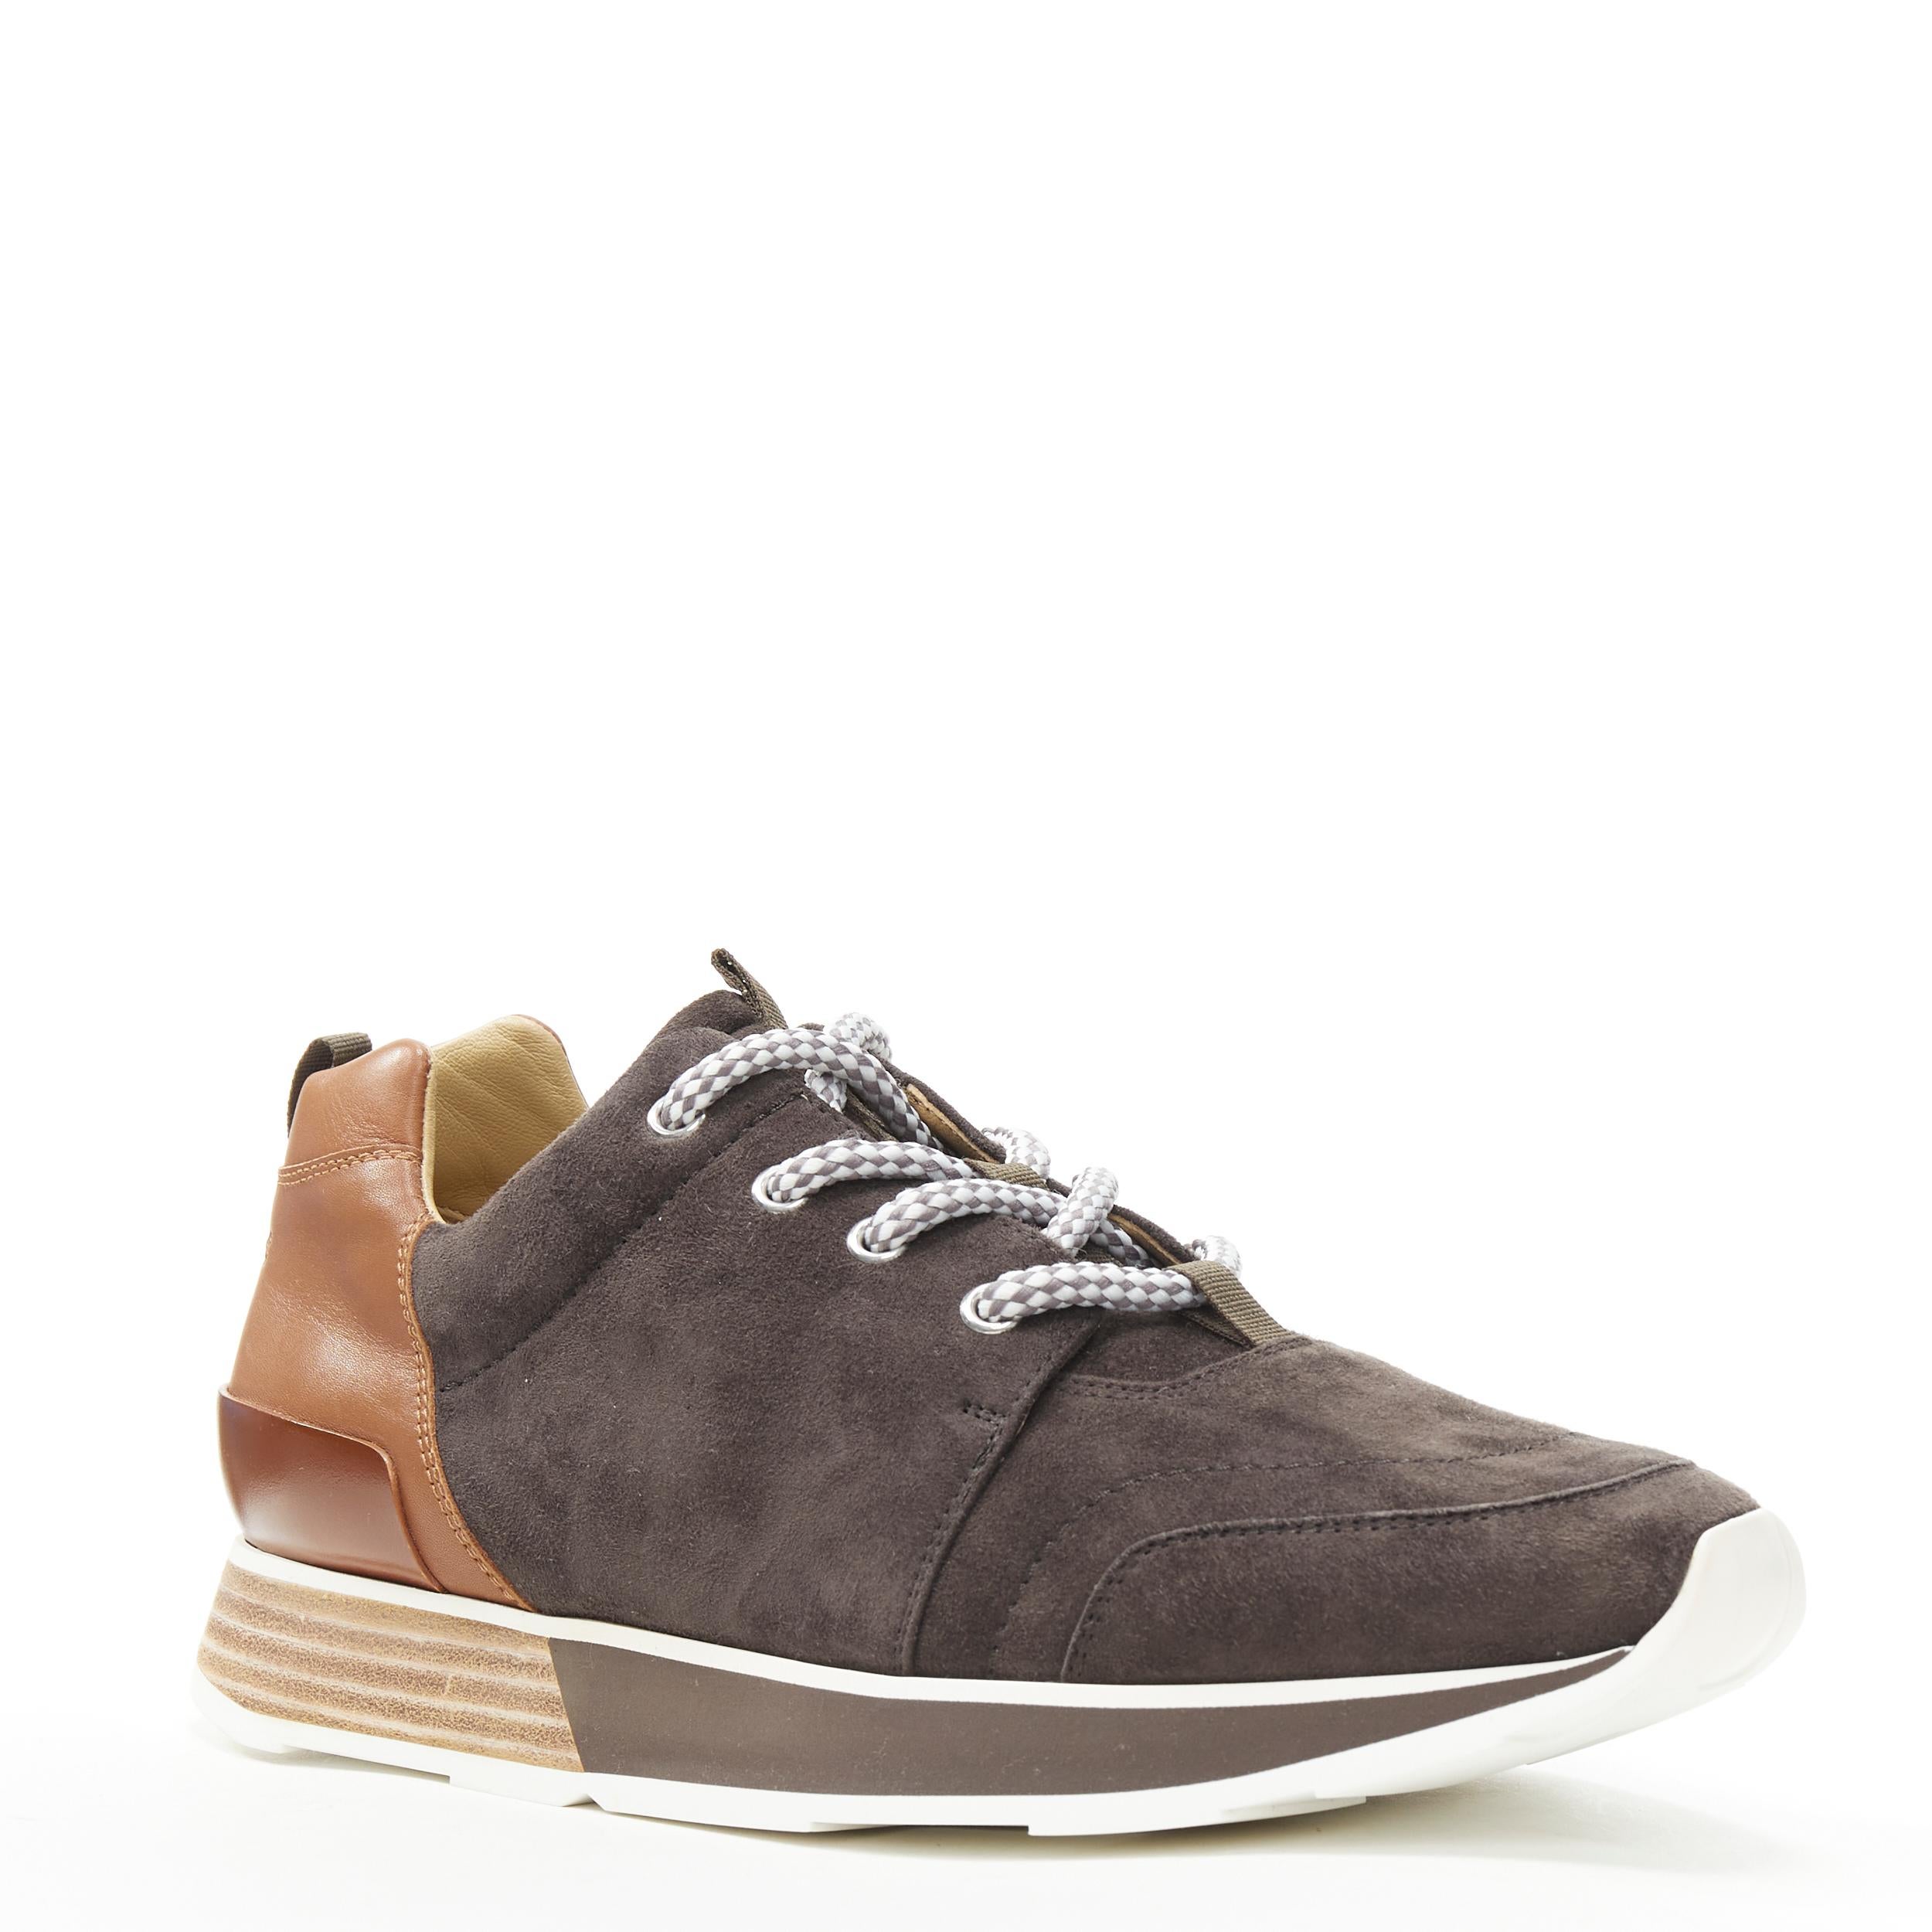 new HERMES Buster grey brown suede lace up wooden rubber sole low sneaker EU39.5 
Reference: TGAS/B01002 
Brand: Hermes 
Model: Buster brown suede 
Material: Suede 
Color: Grey 
Pattern: Solid 
Closure: Lace Up 
Extra Detail: Buster sneaker. Dark